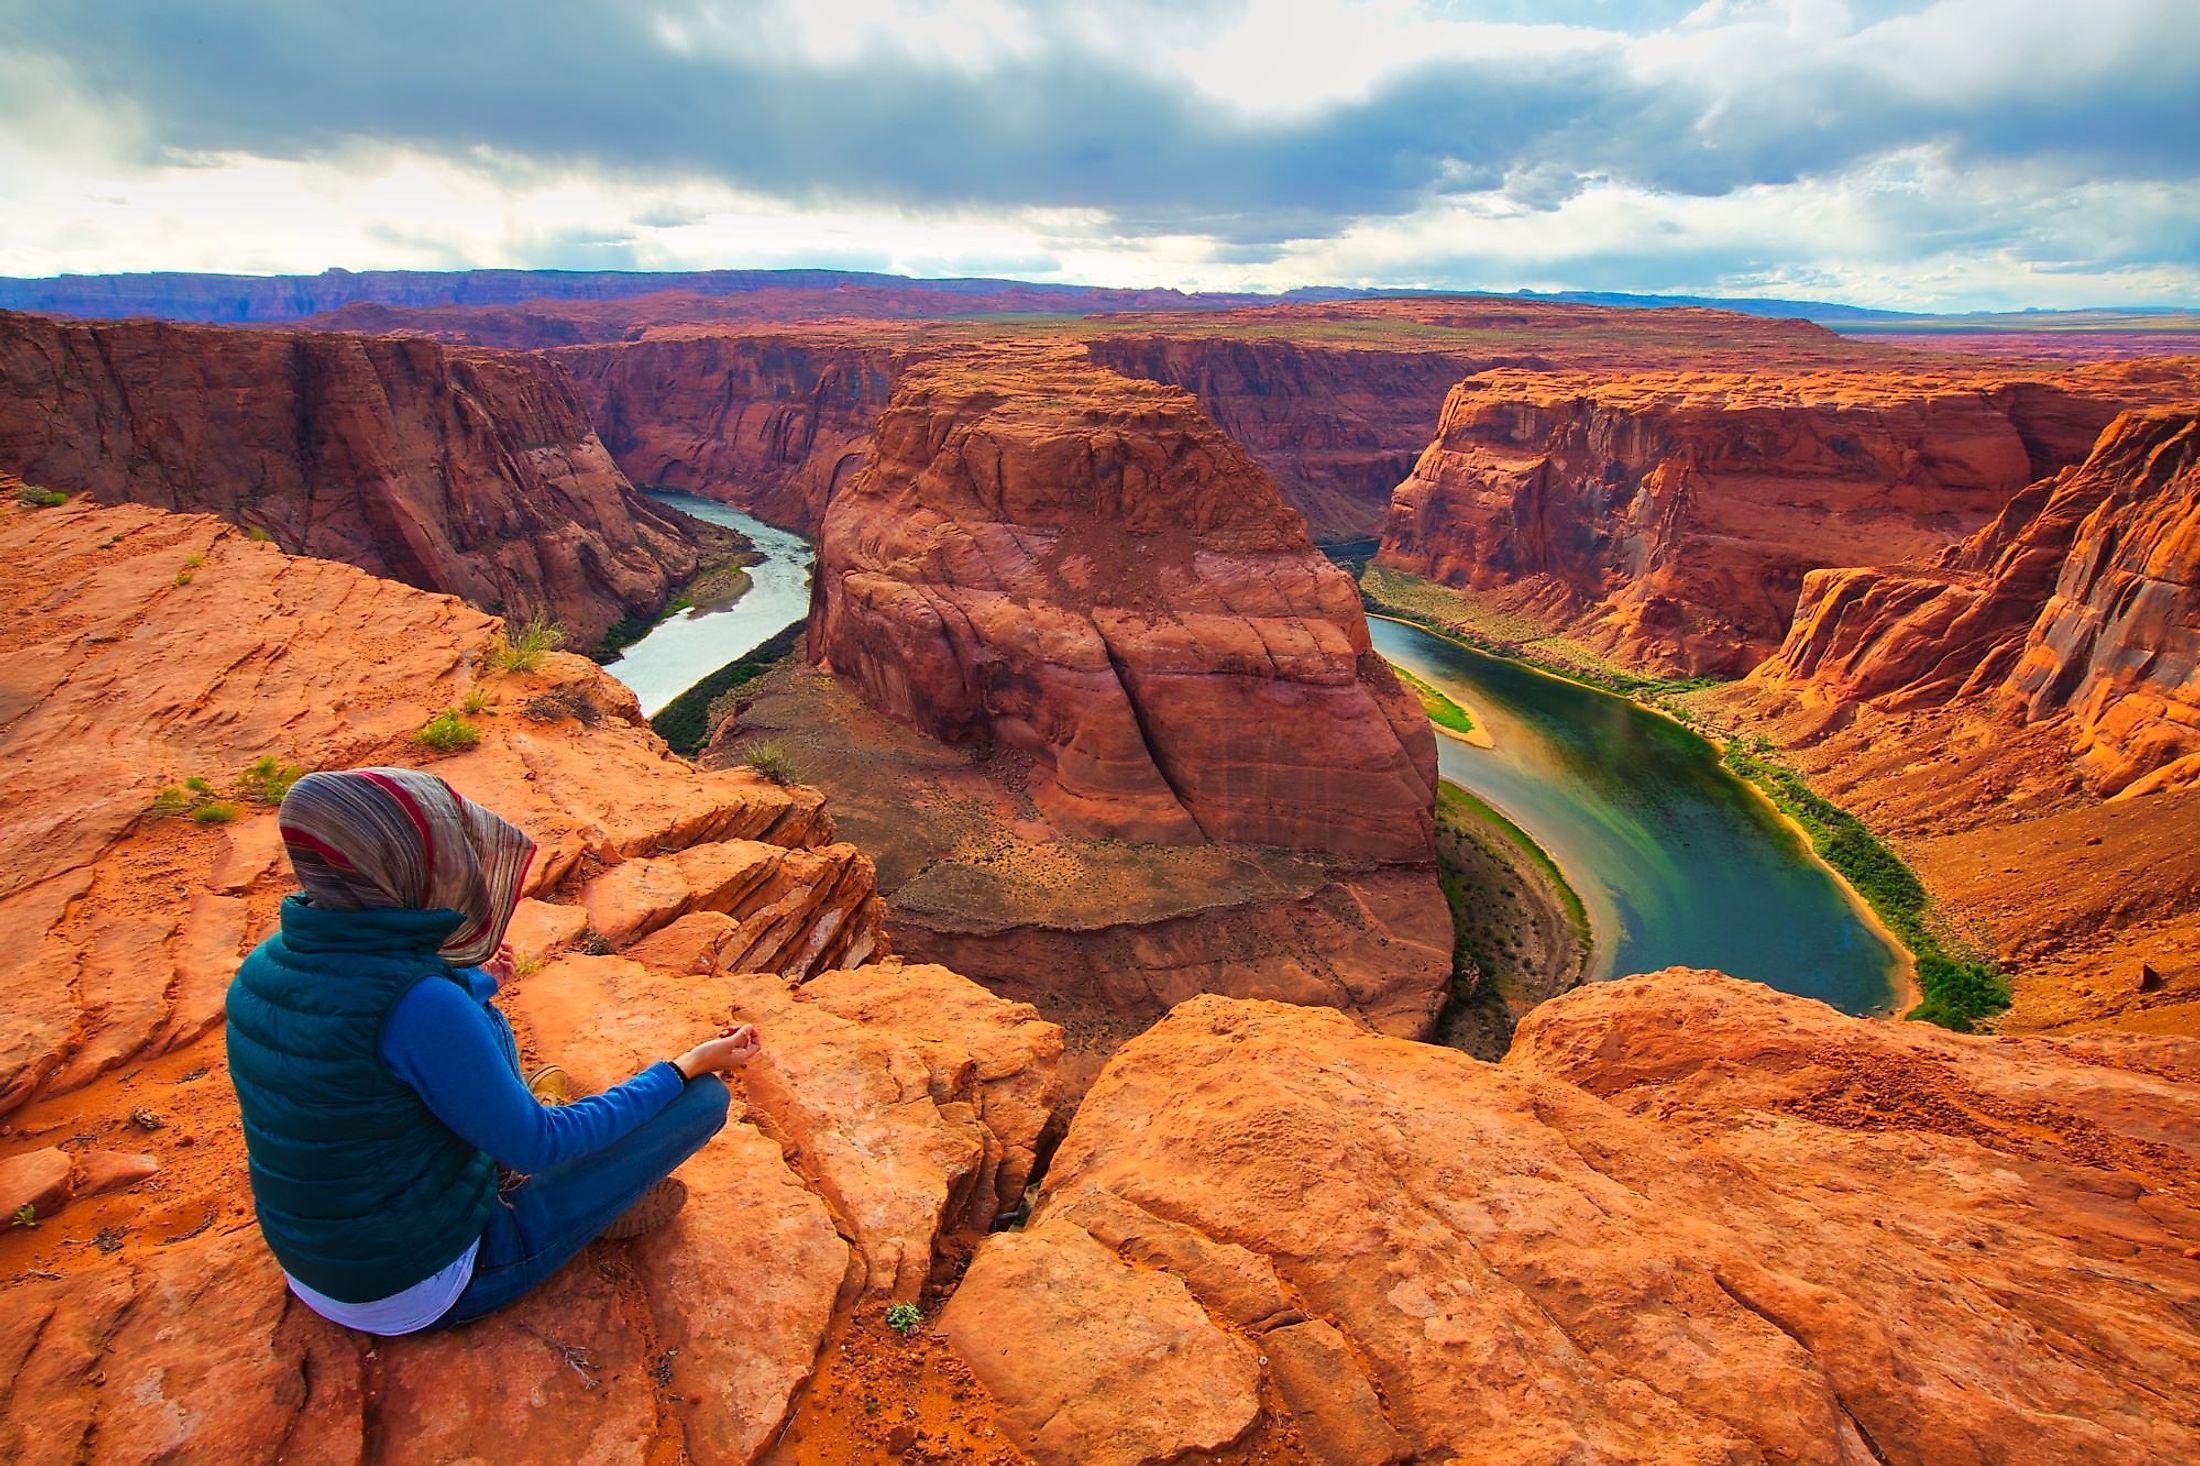 A person meditating in front of the scenic Horseshoe Bend of the Colorado River in Arizona.